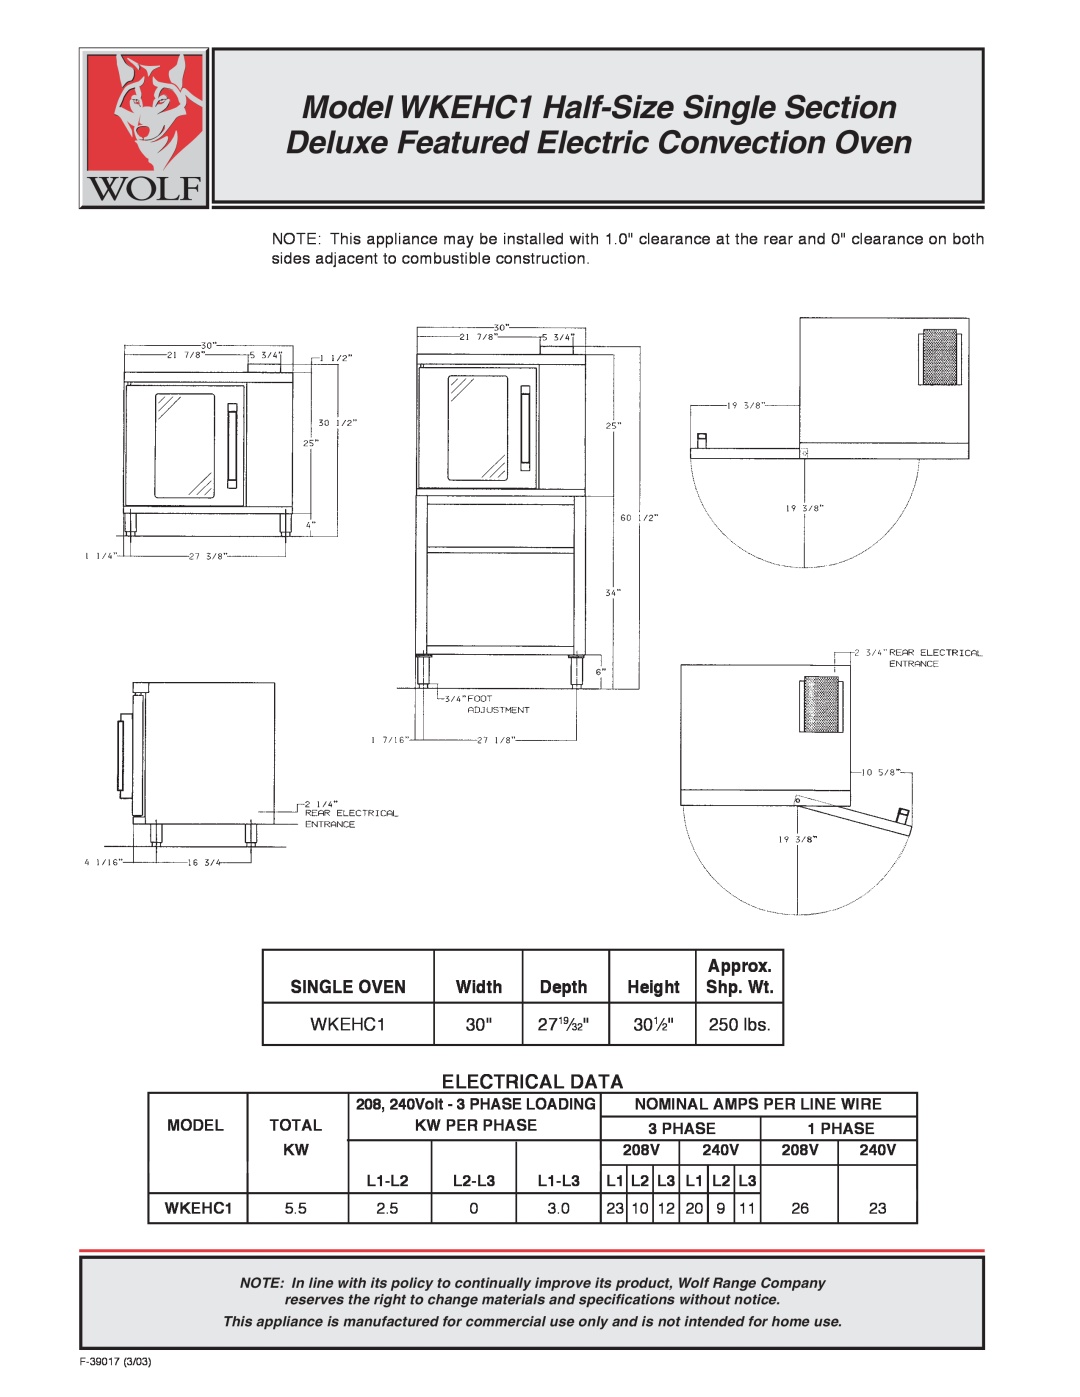 Wolf WKECH1 Approx, Depth, Shp. Wt, Model WKEHC1 Half-Size Single Section, Deluxe Featured Electric Convection Oven, 30 1⁄ 